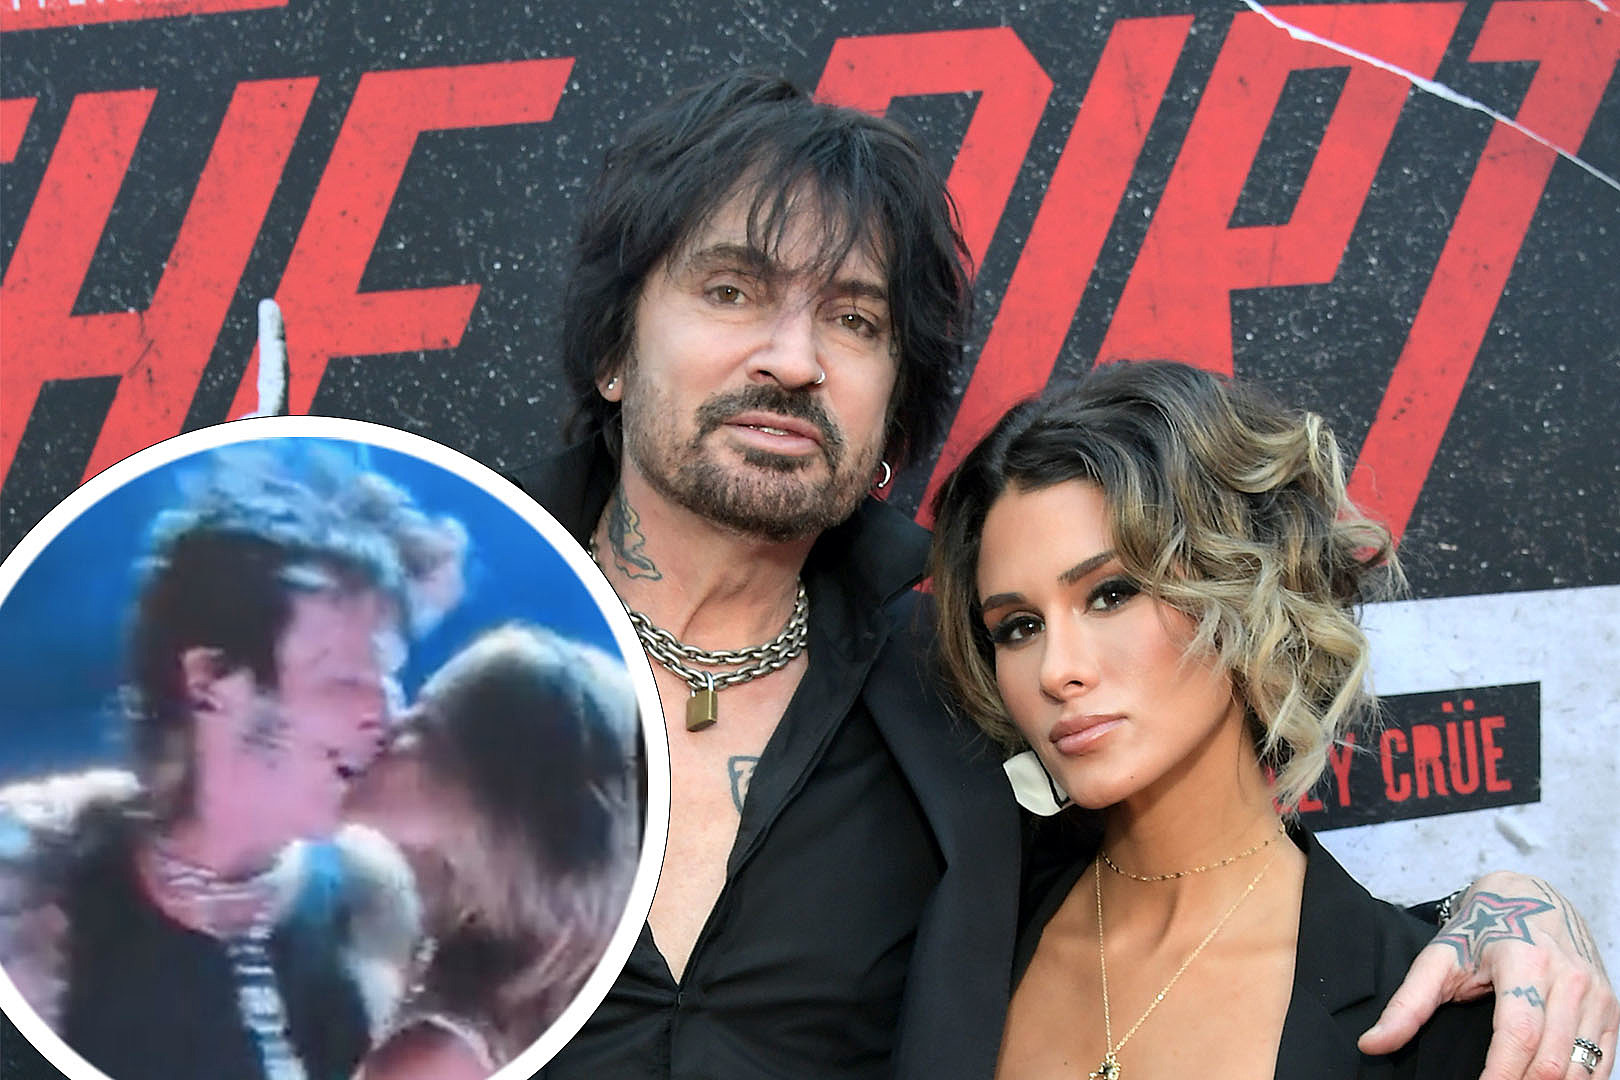 Tommy Lee Brings Wife Brittany Furlan Onstage to Flash Crowd pic